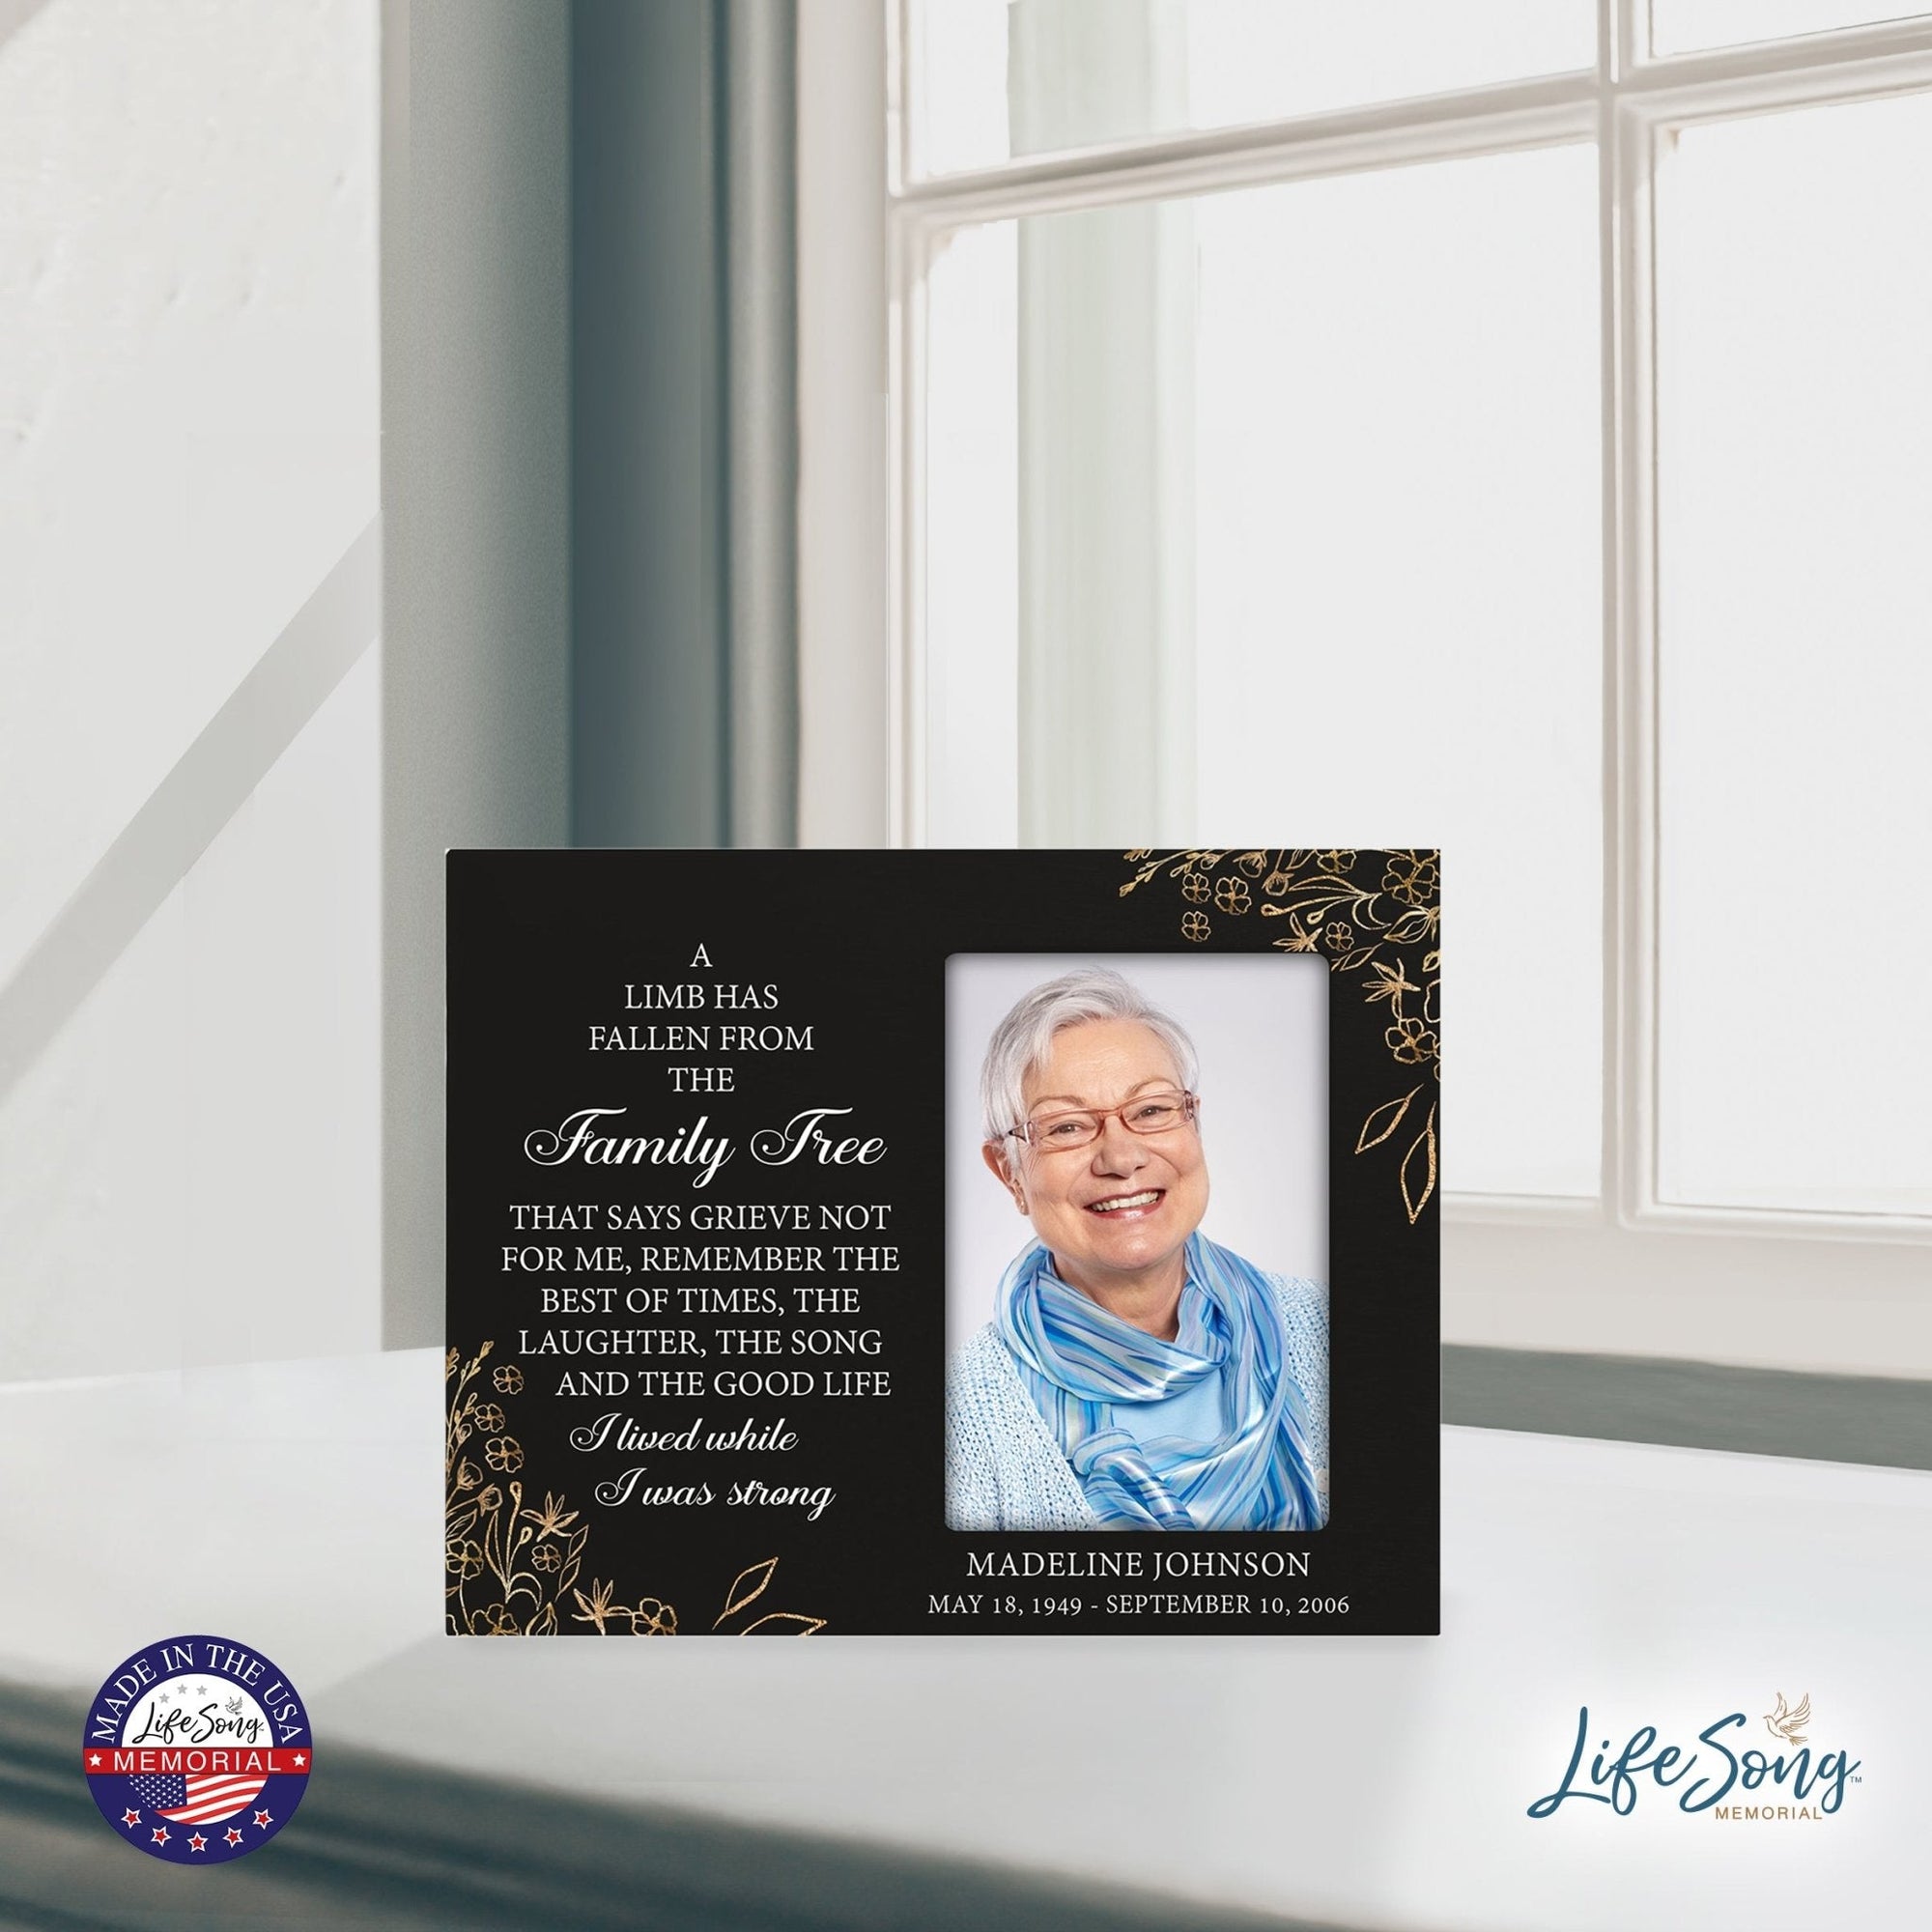 Personalized Horizontal 8x10 Wooden Memorial Picture Frame Holds 4x6 Photo - A Limb Has Fallen (Black) - LifeSong Milestones